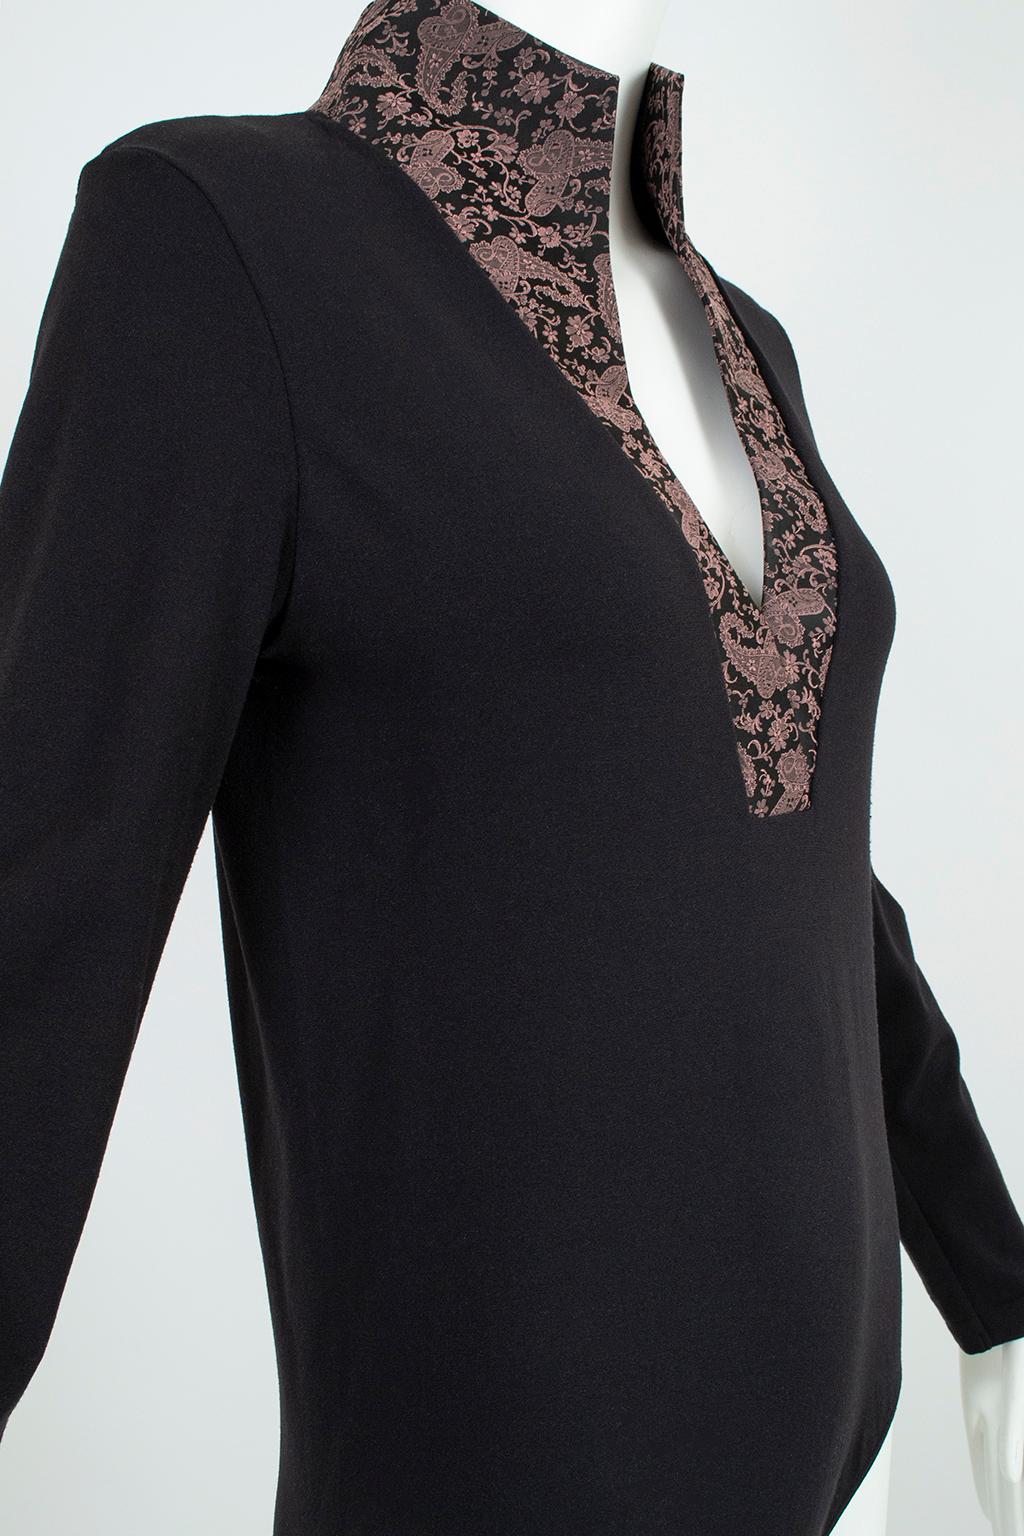 Wolford Black Queen Anne Neck Bodysuit with Paisley Jacquard Placket – L, 2000s In Good Condition For Sale In Tucson, AZ